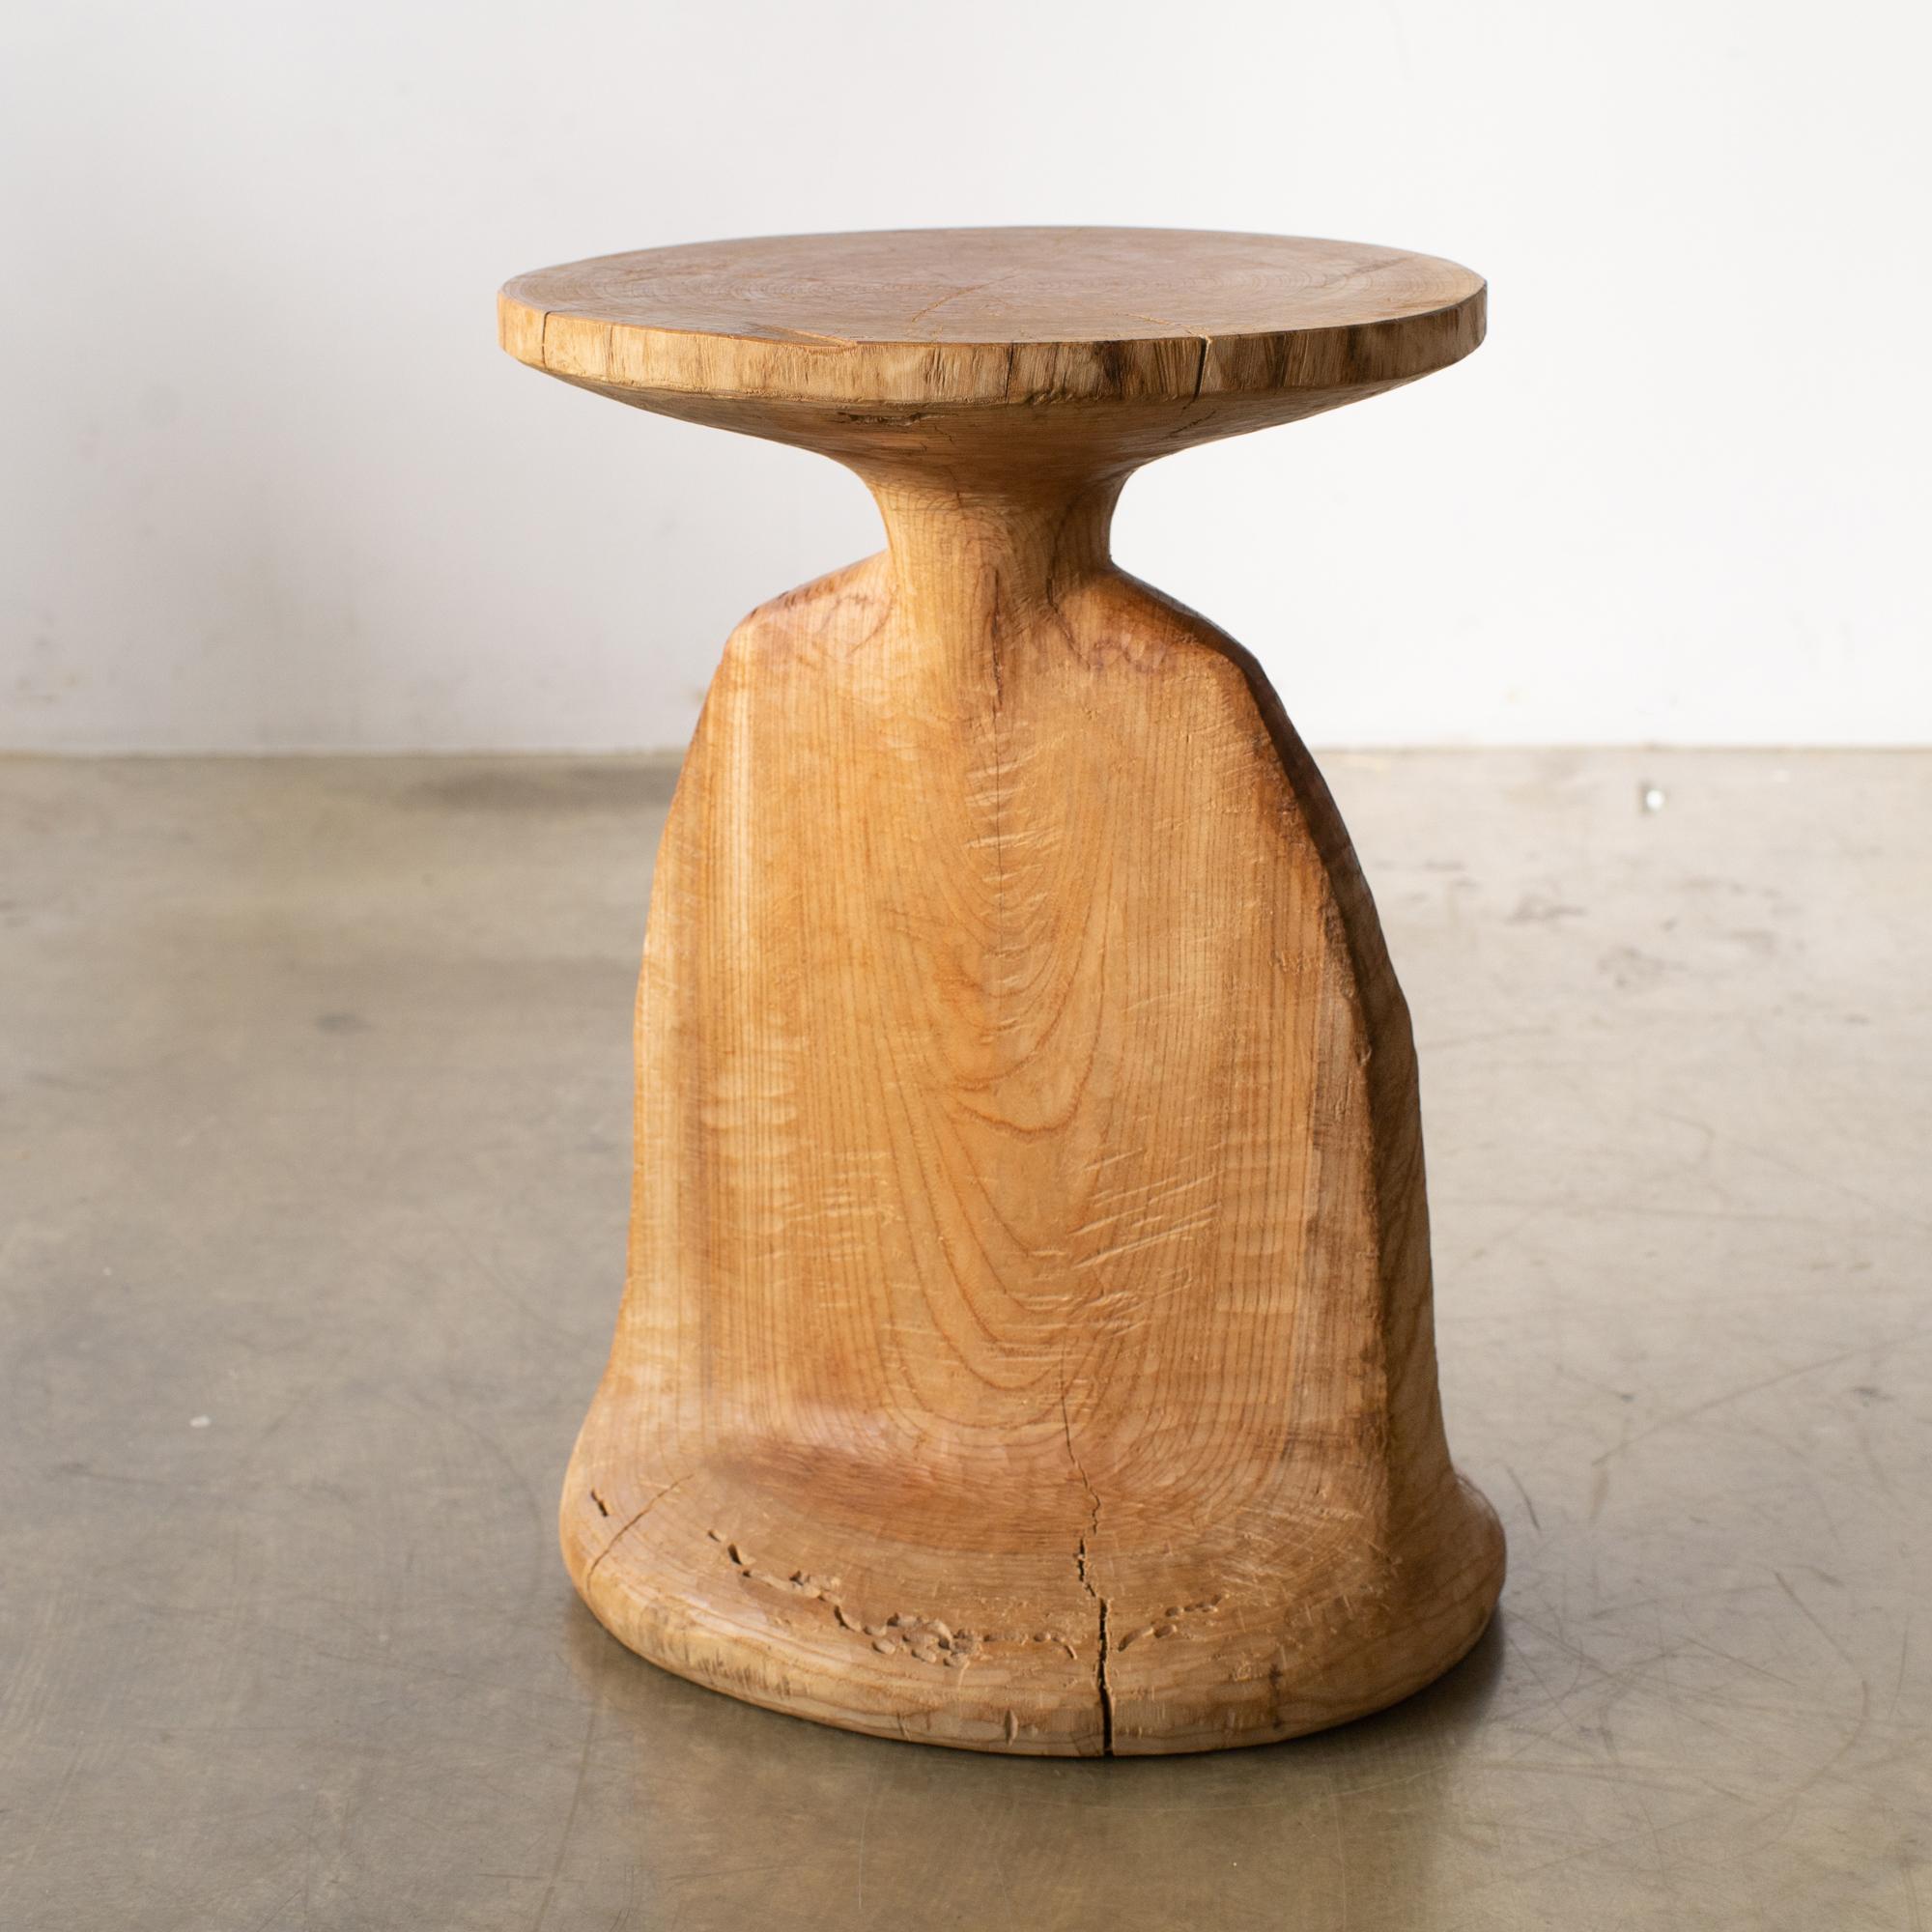 Name: Zen
Sculptural stool by Zougei carved furniture
Material: Zelkova
This work is carved from log with some kinds of chainsaws.
Most of wood used for Nishimura's works are unable to use anything, these woods are unsuitable material for